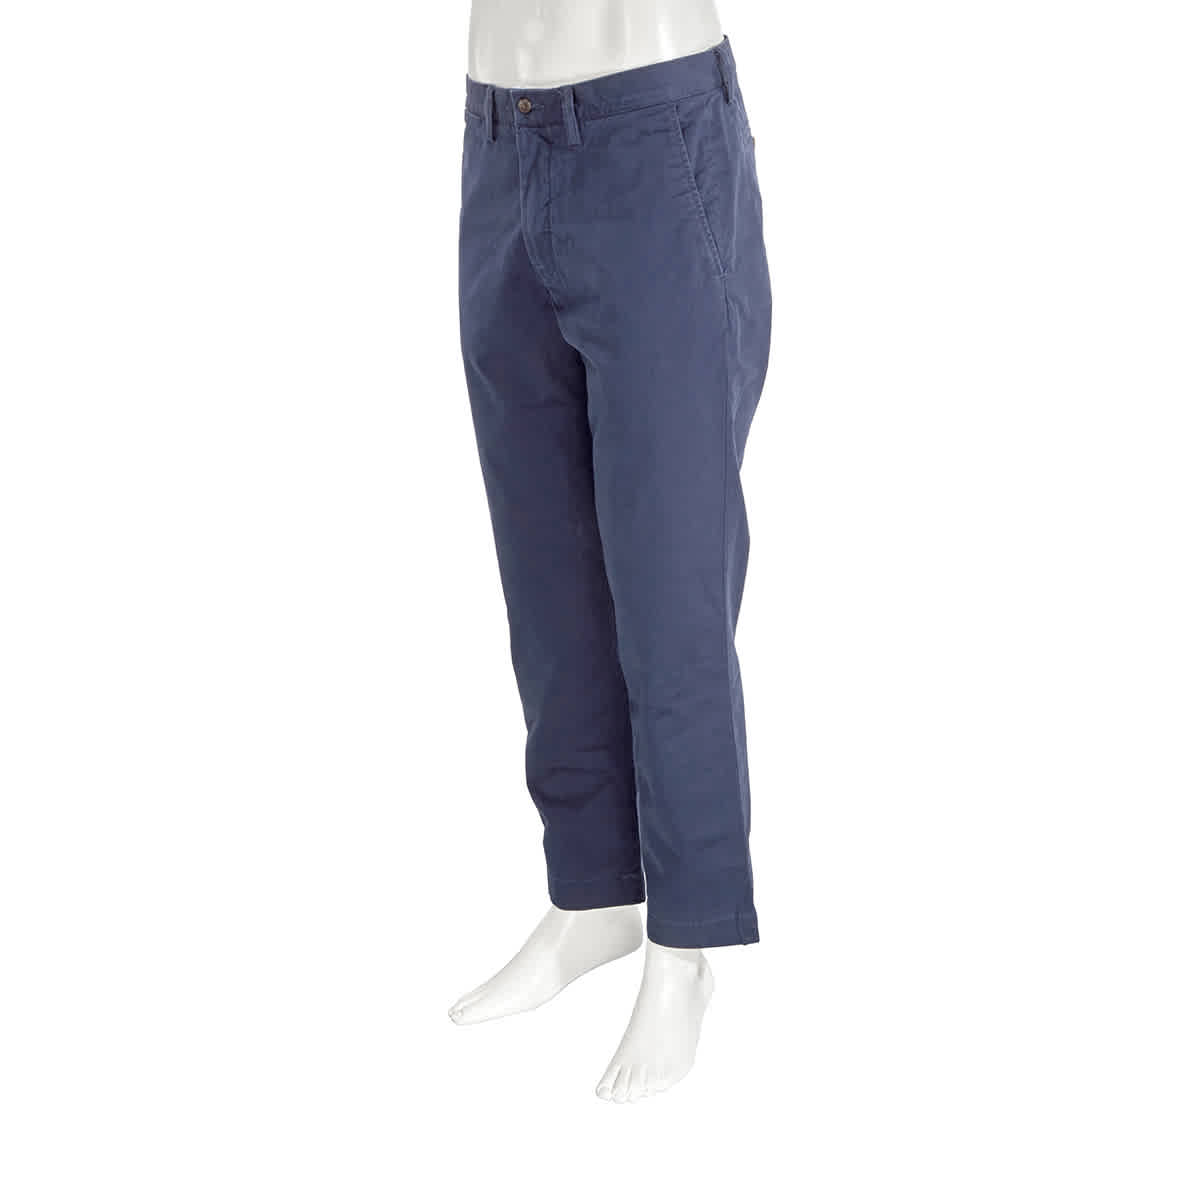 Polo Ralph Lauren Men's Classics Navy Bedford Pant Straight Fit, Brand Size 30W-30L - image 2 of 2